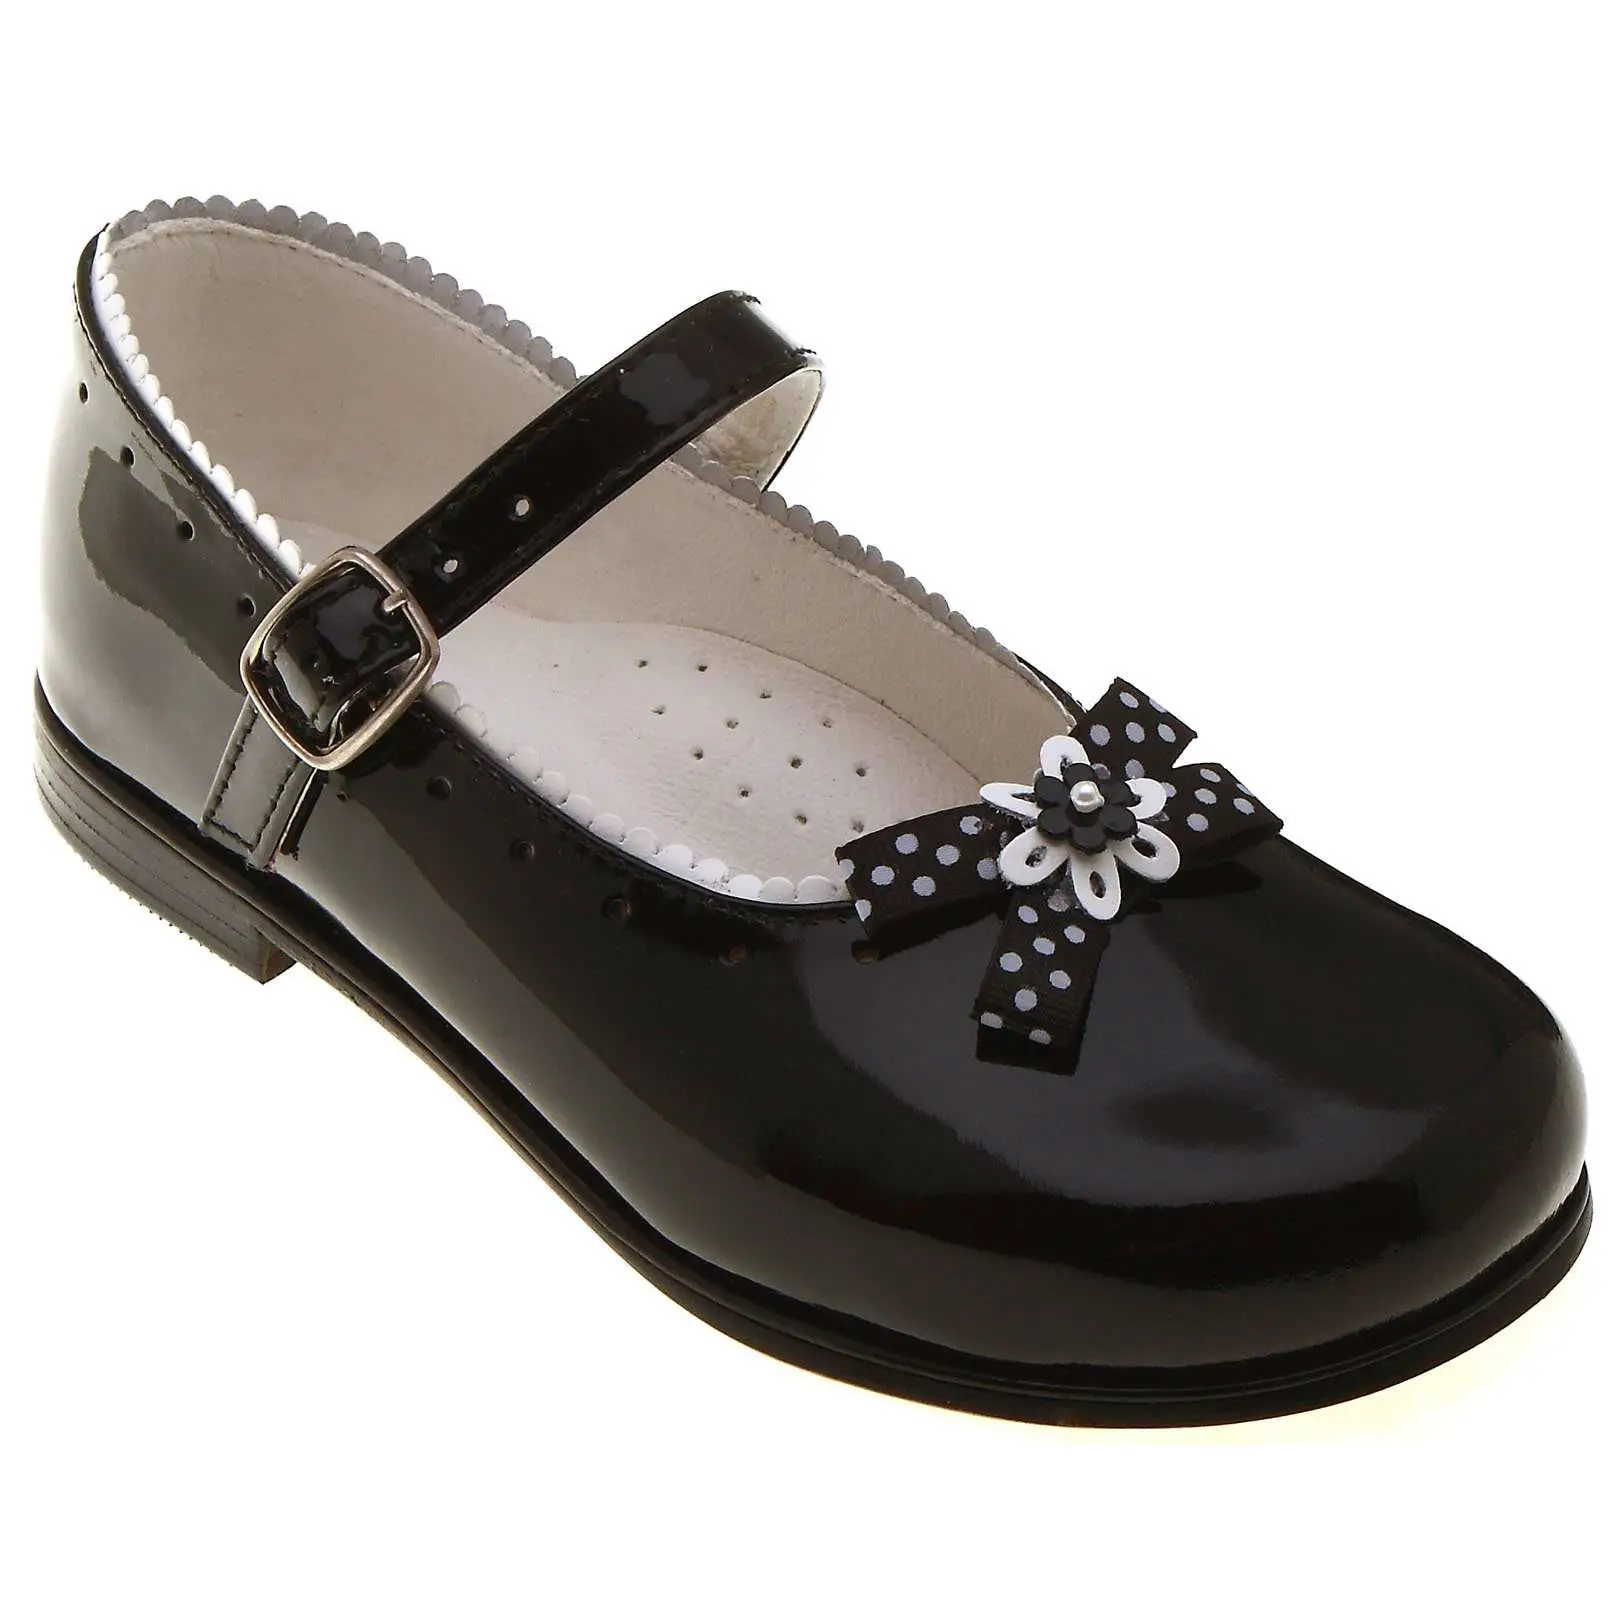 SALE Toddler Girls Black Mary Jane Shoes Patent Leather ...